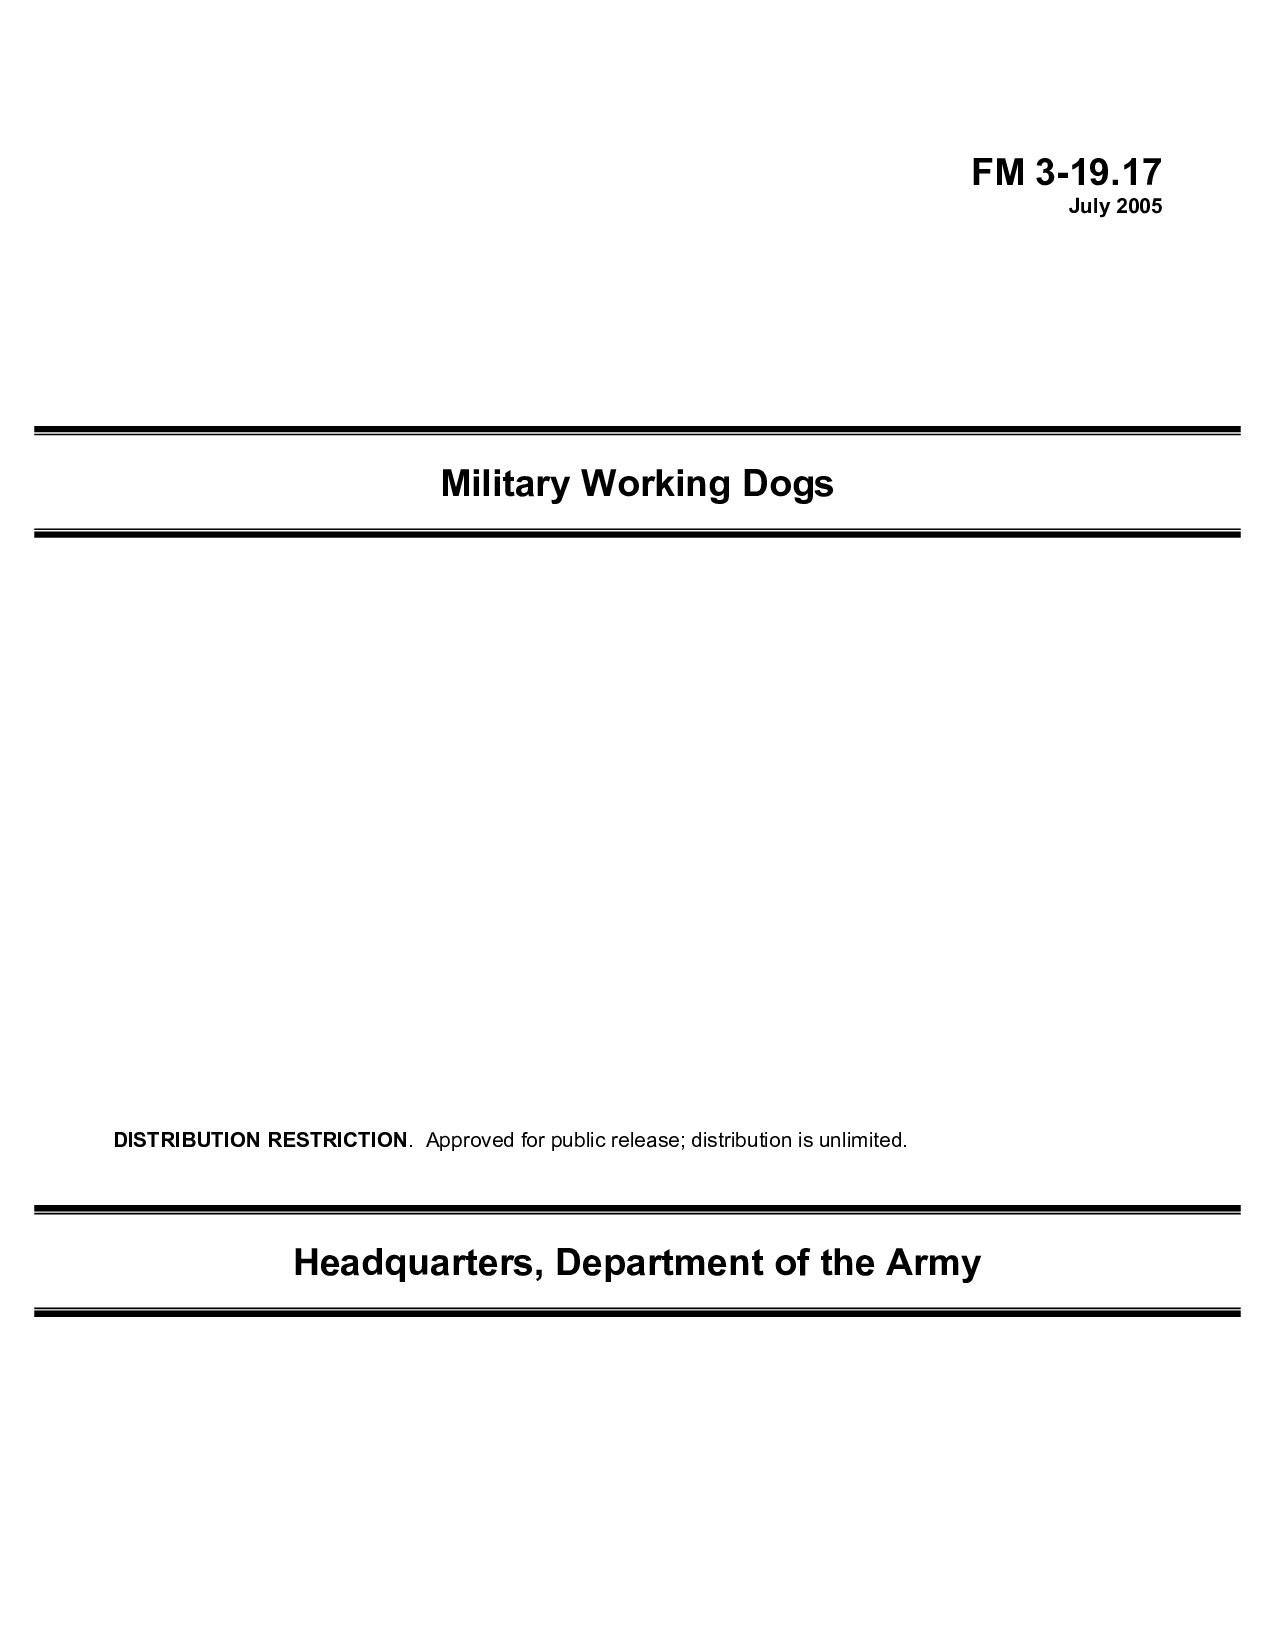 FM3-19.17 Military Working Dogs